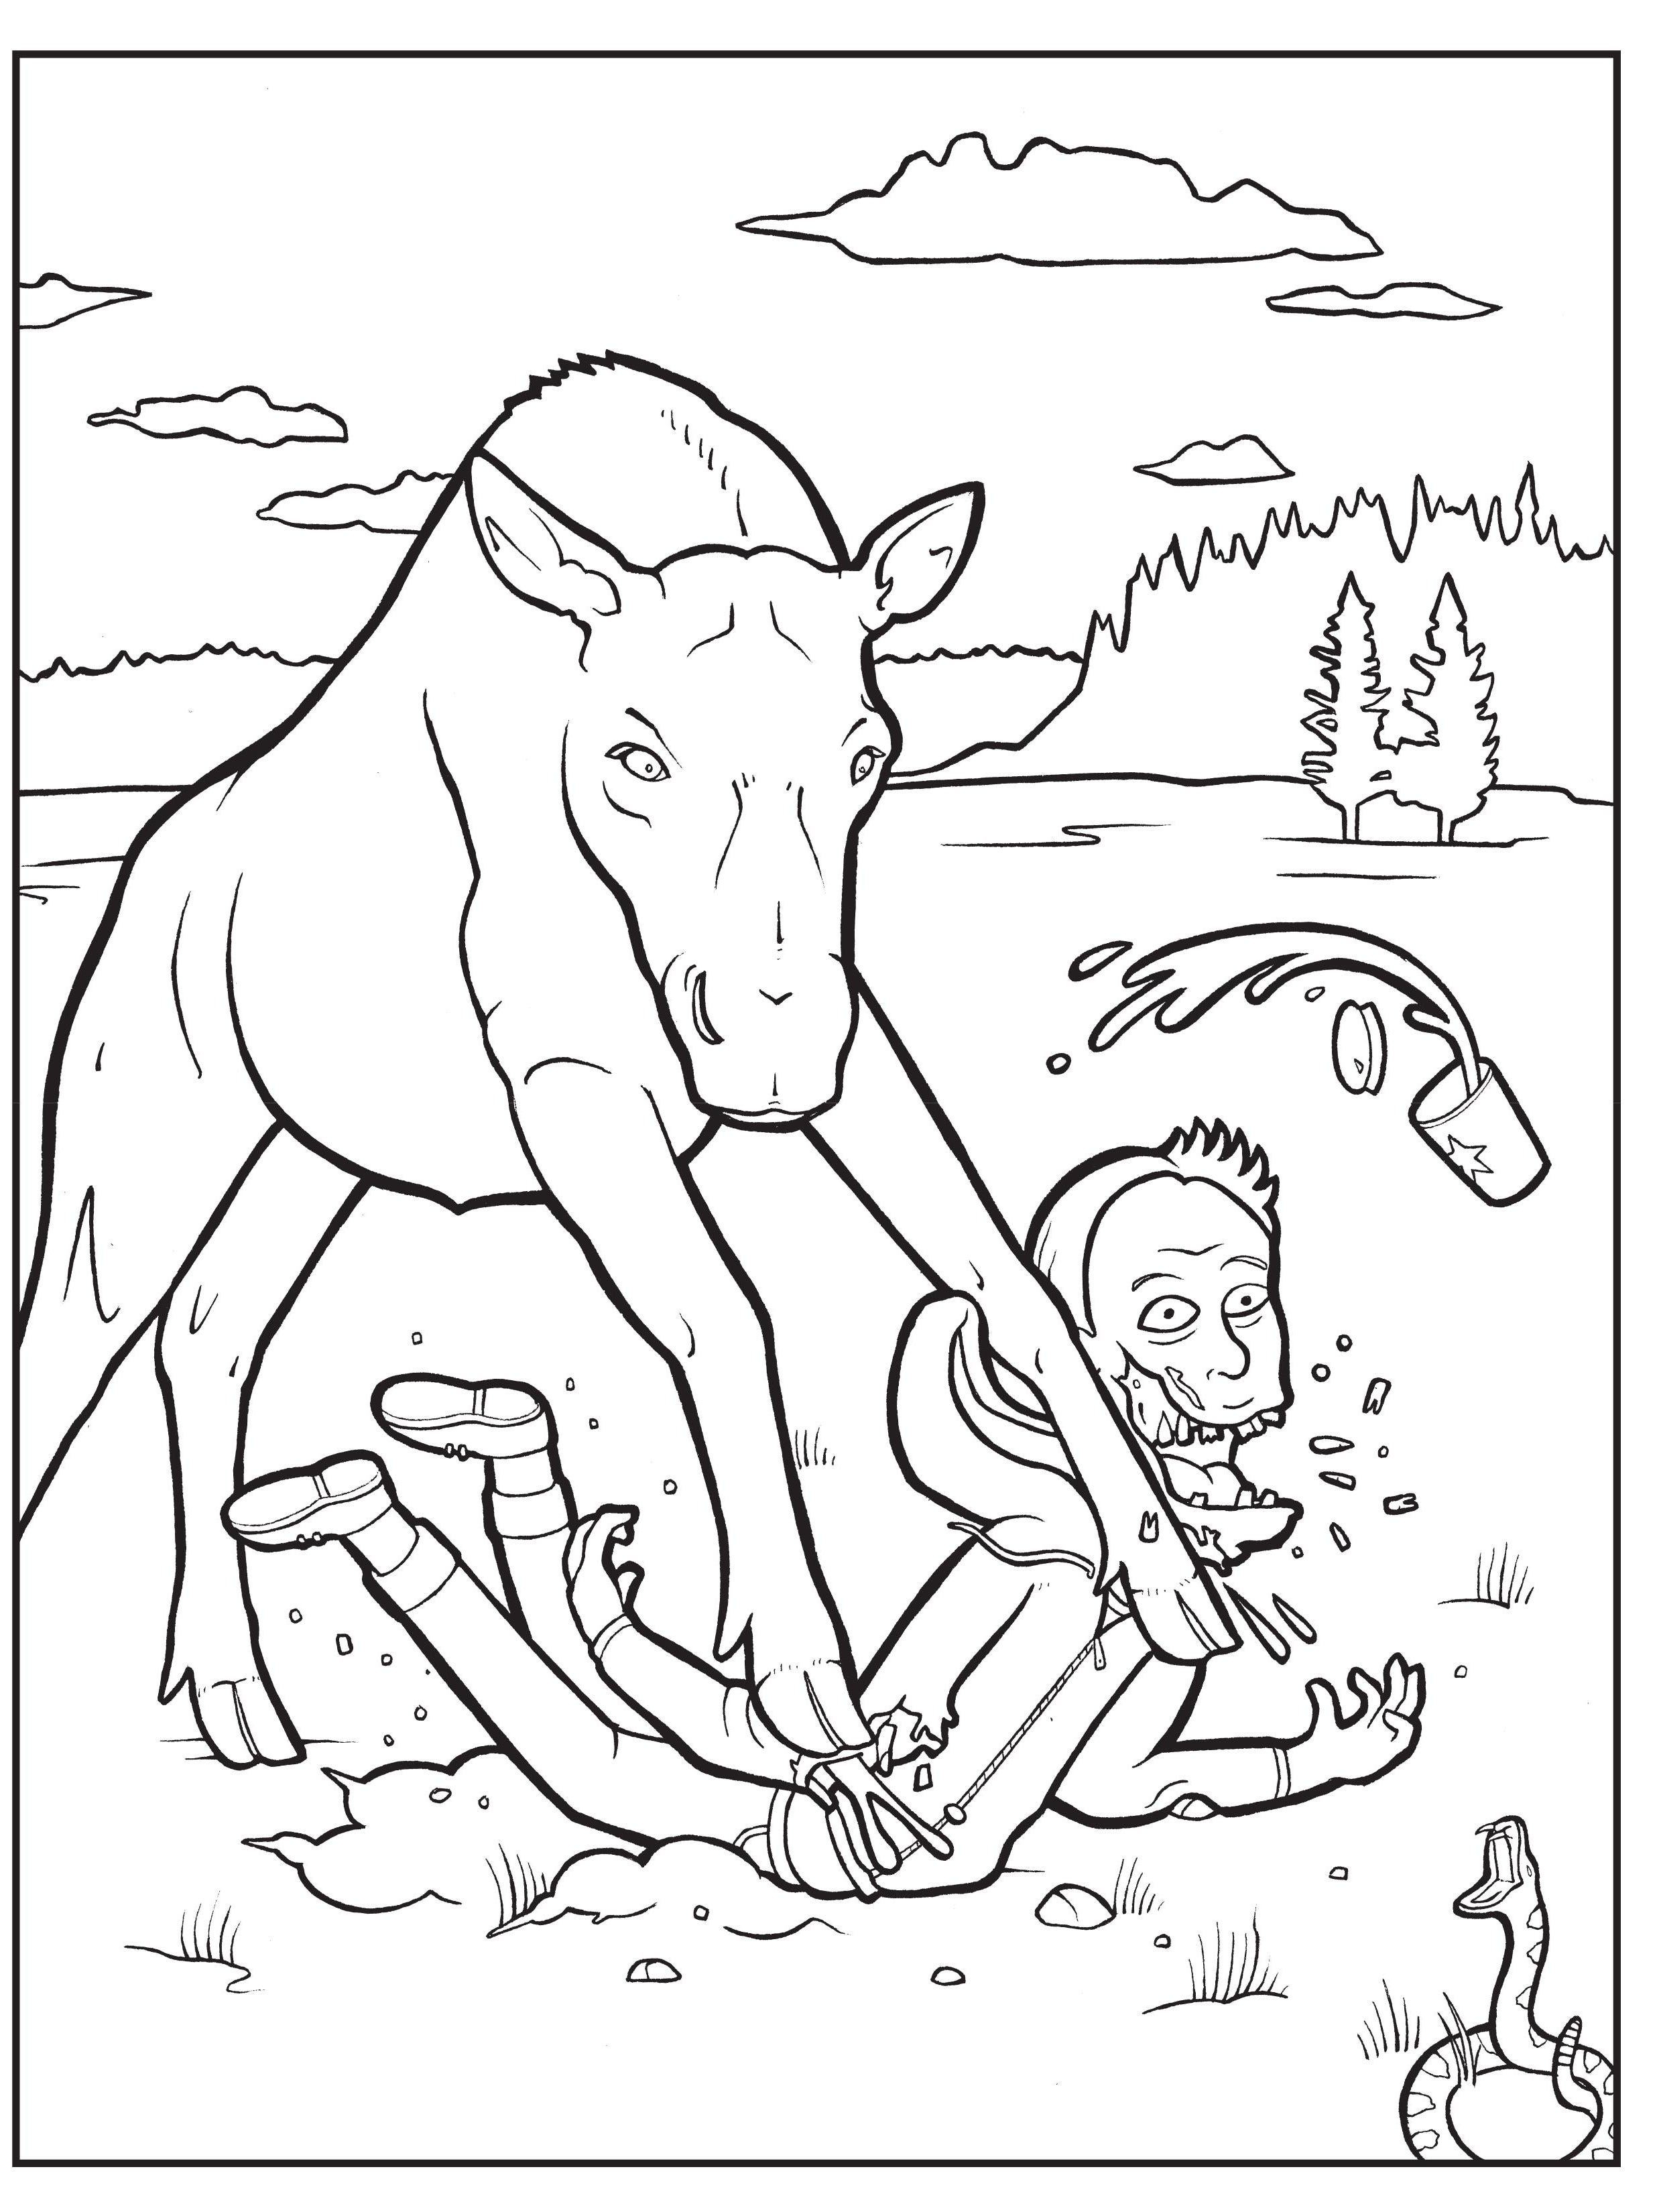 Gory coloring book paints caution tales of yellowstone